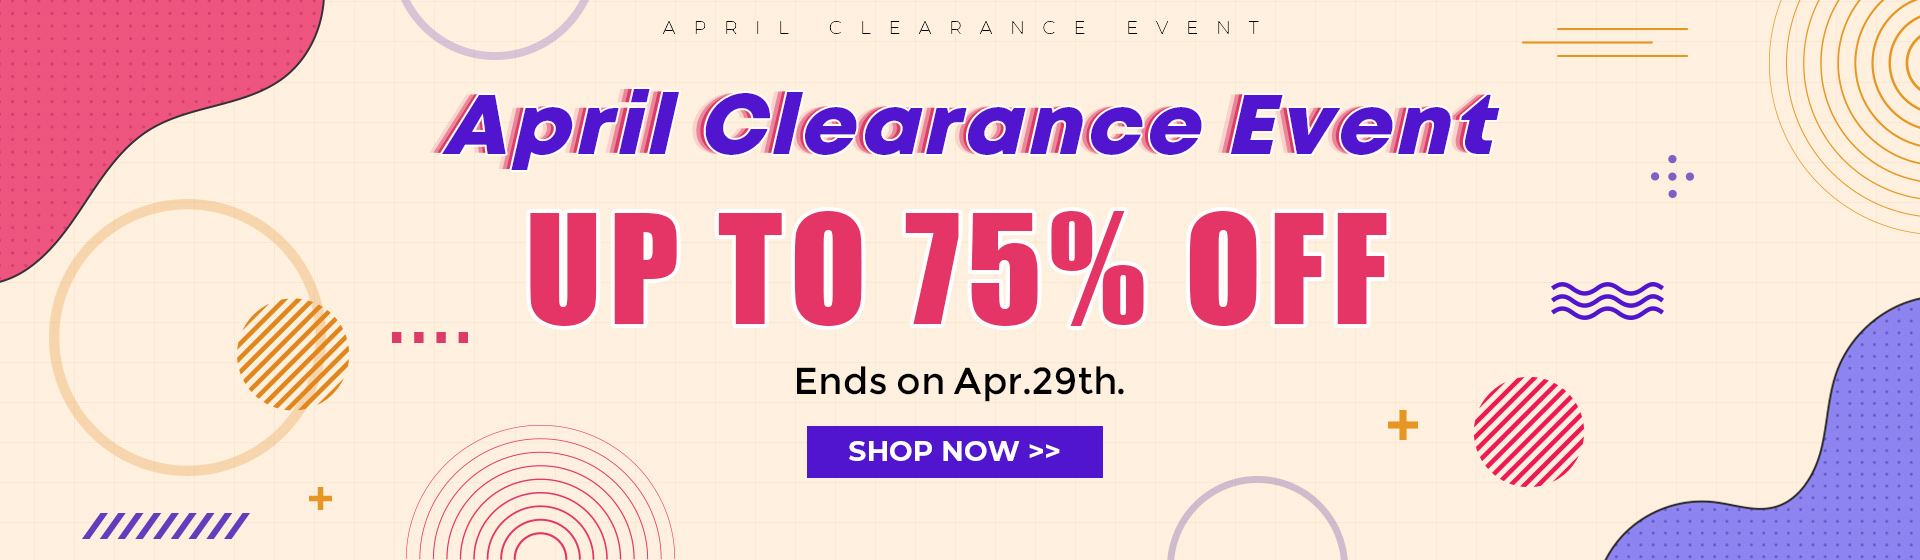 April Clearance Event -- UP TO 75% OFF